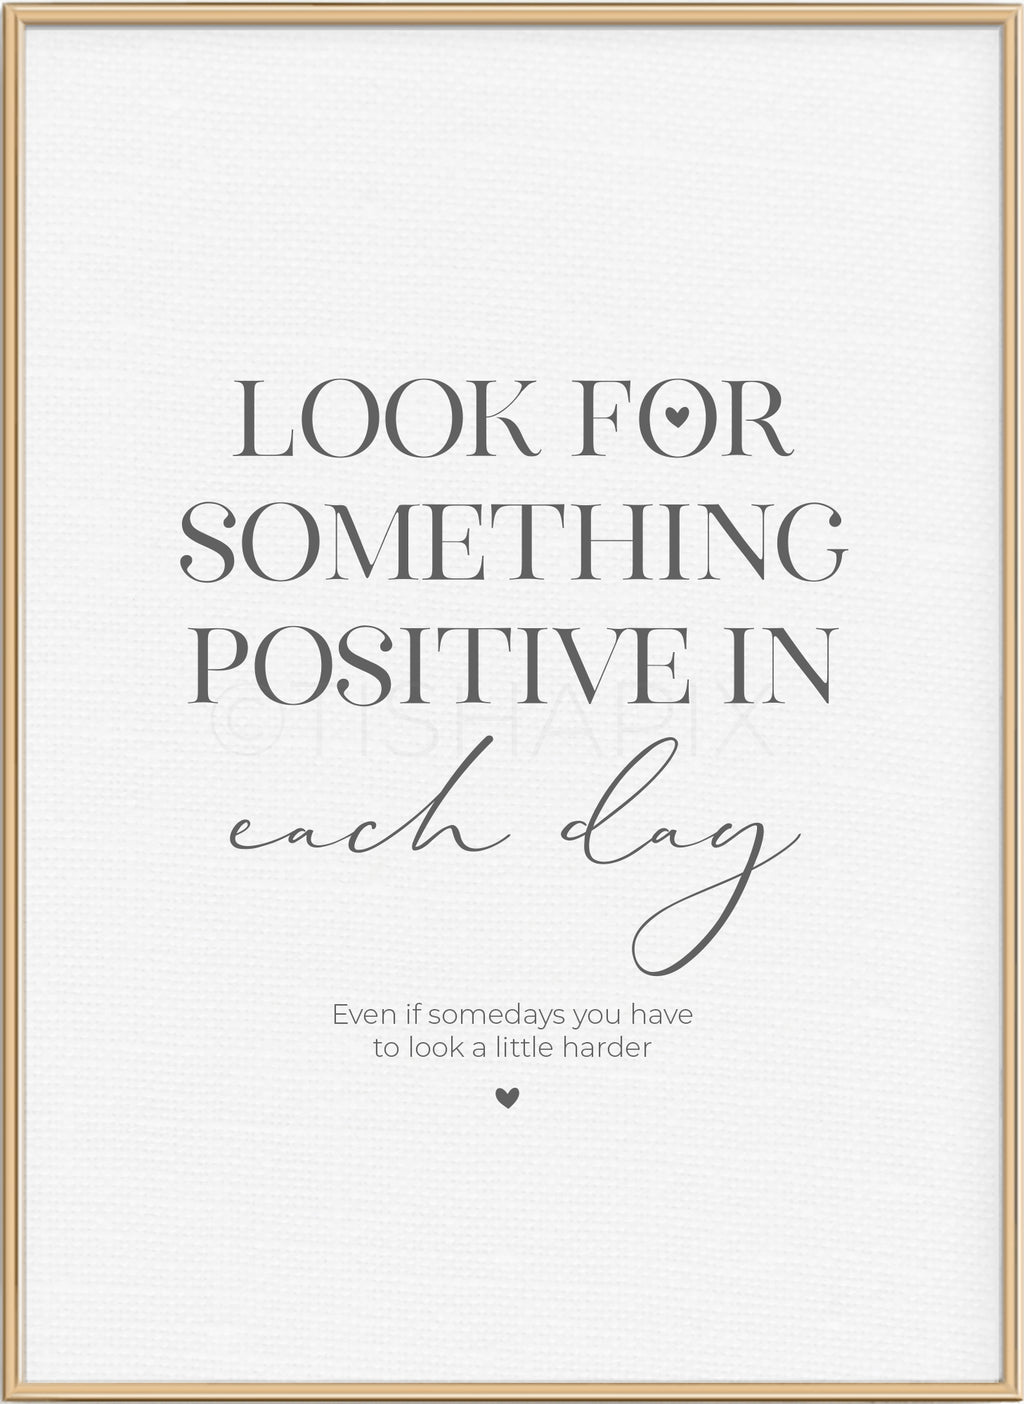 Look For Something Positive In Each Day